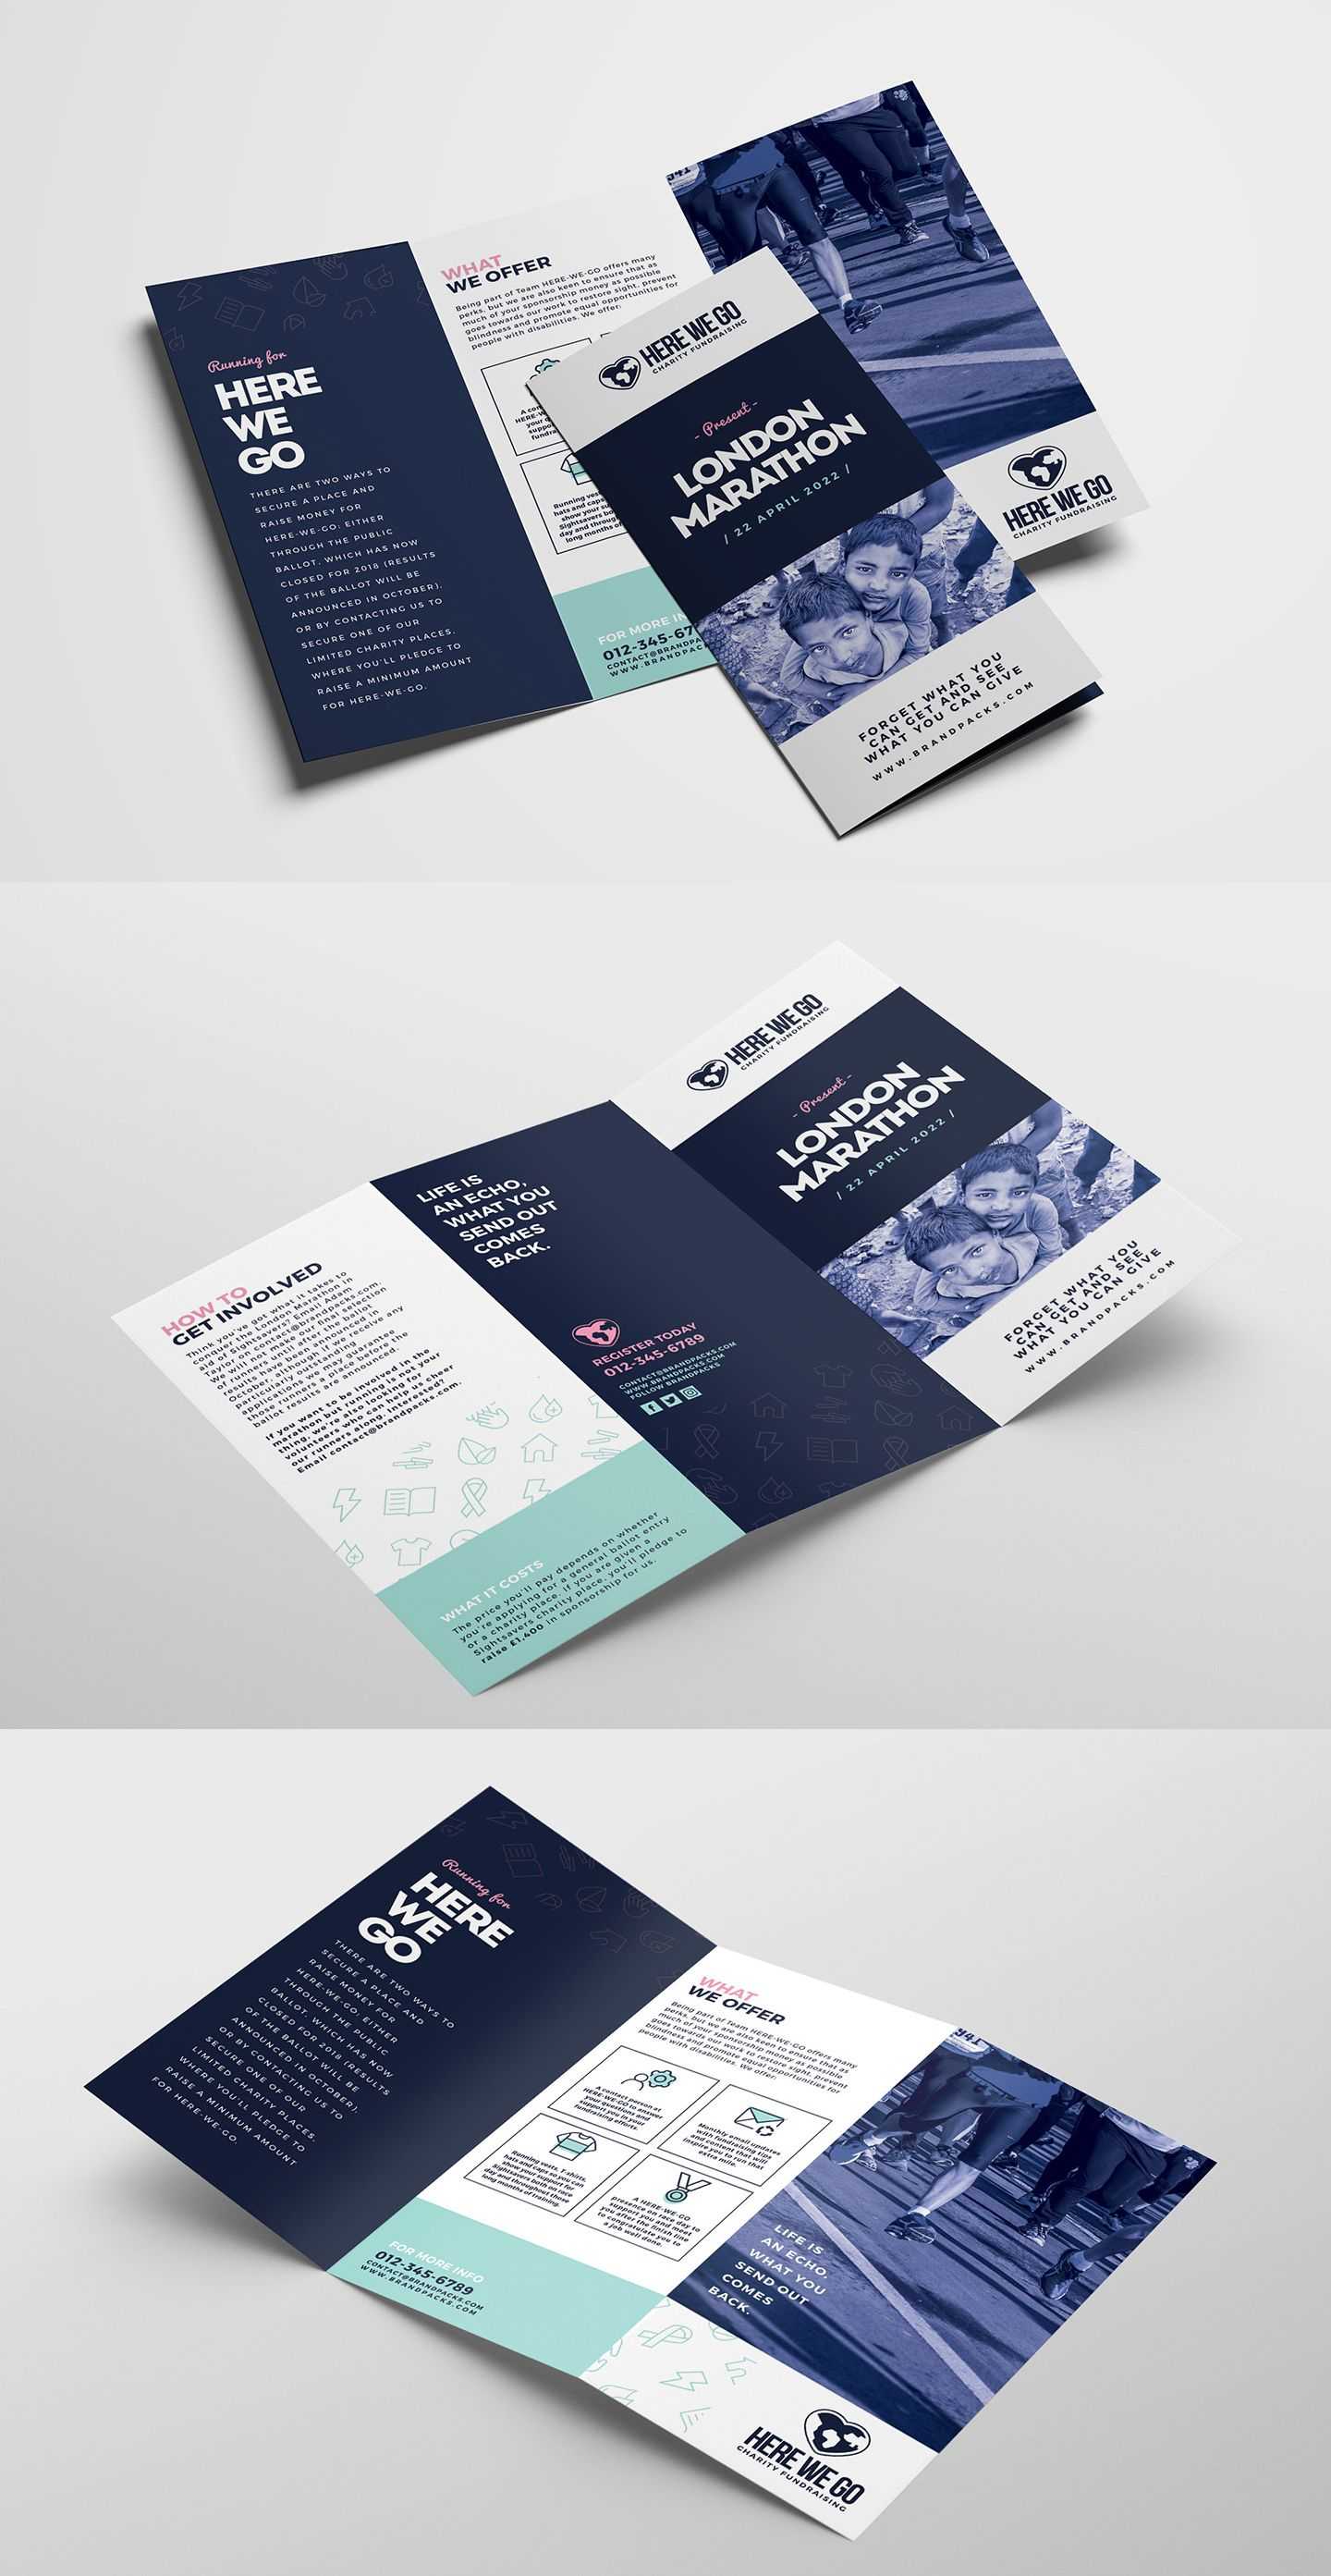 Free Tri Fold Brochure Template For Fundraisers & Charity For Quad Fold Brochure Template